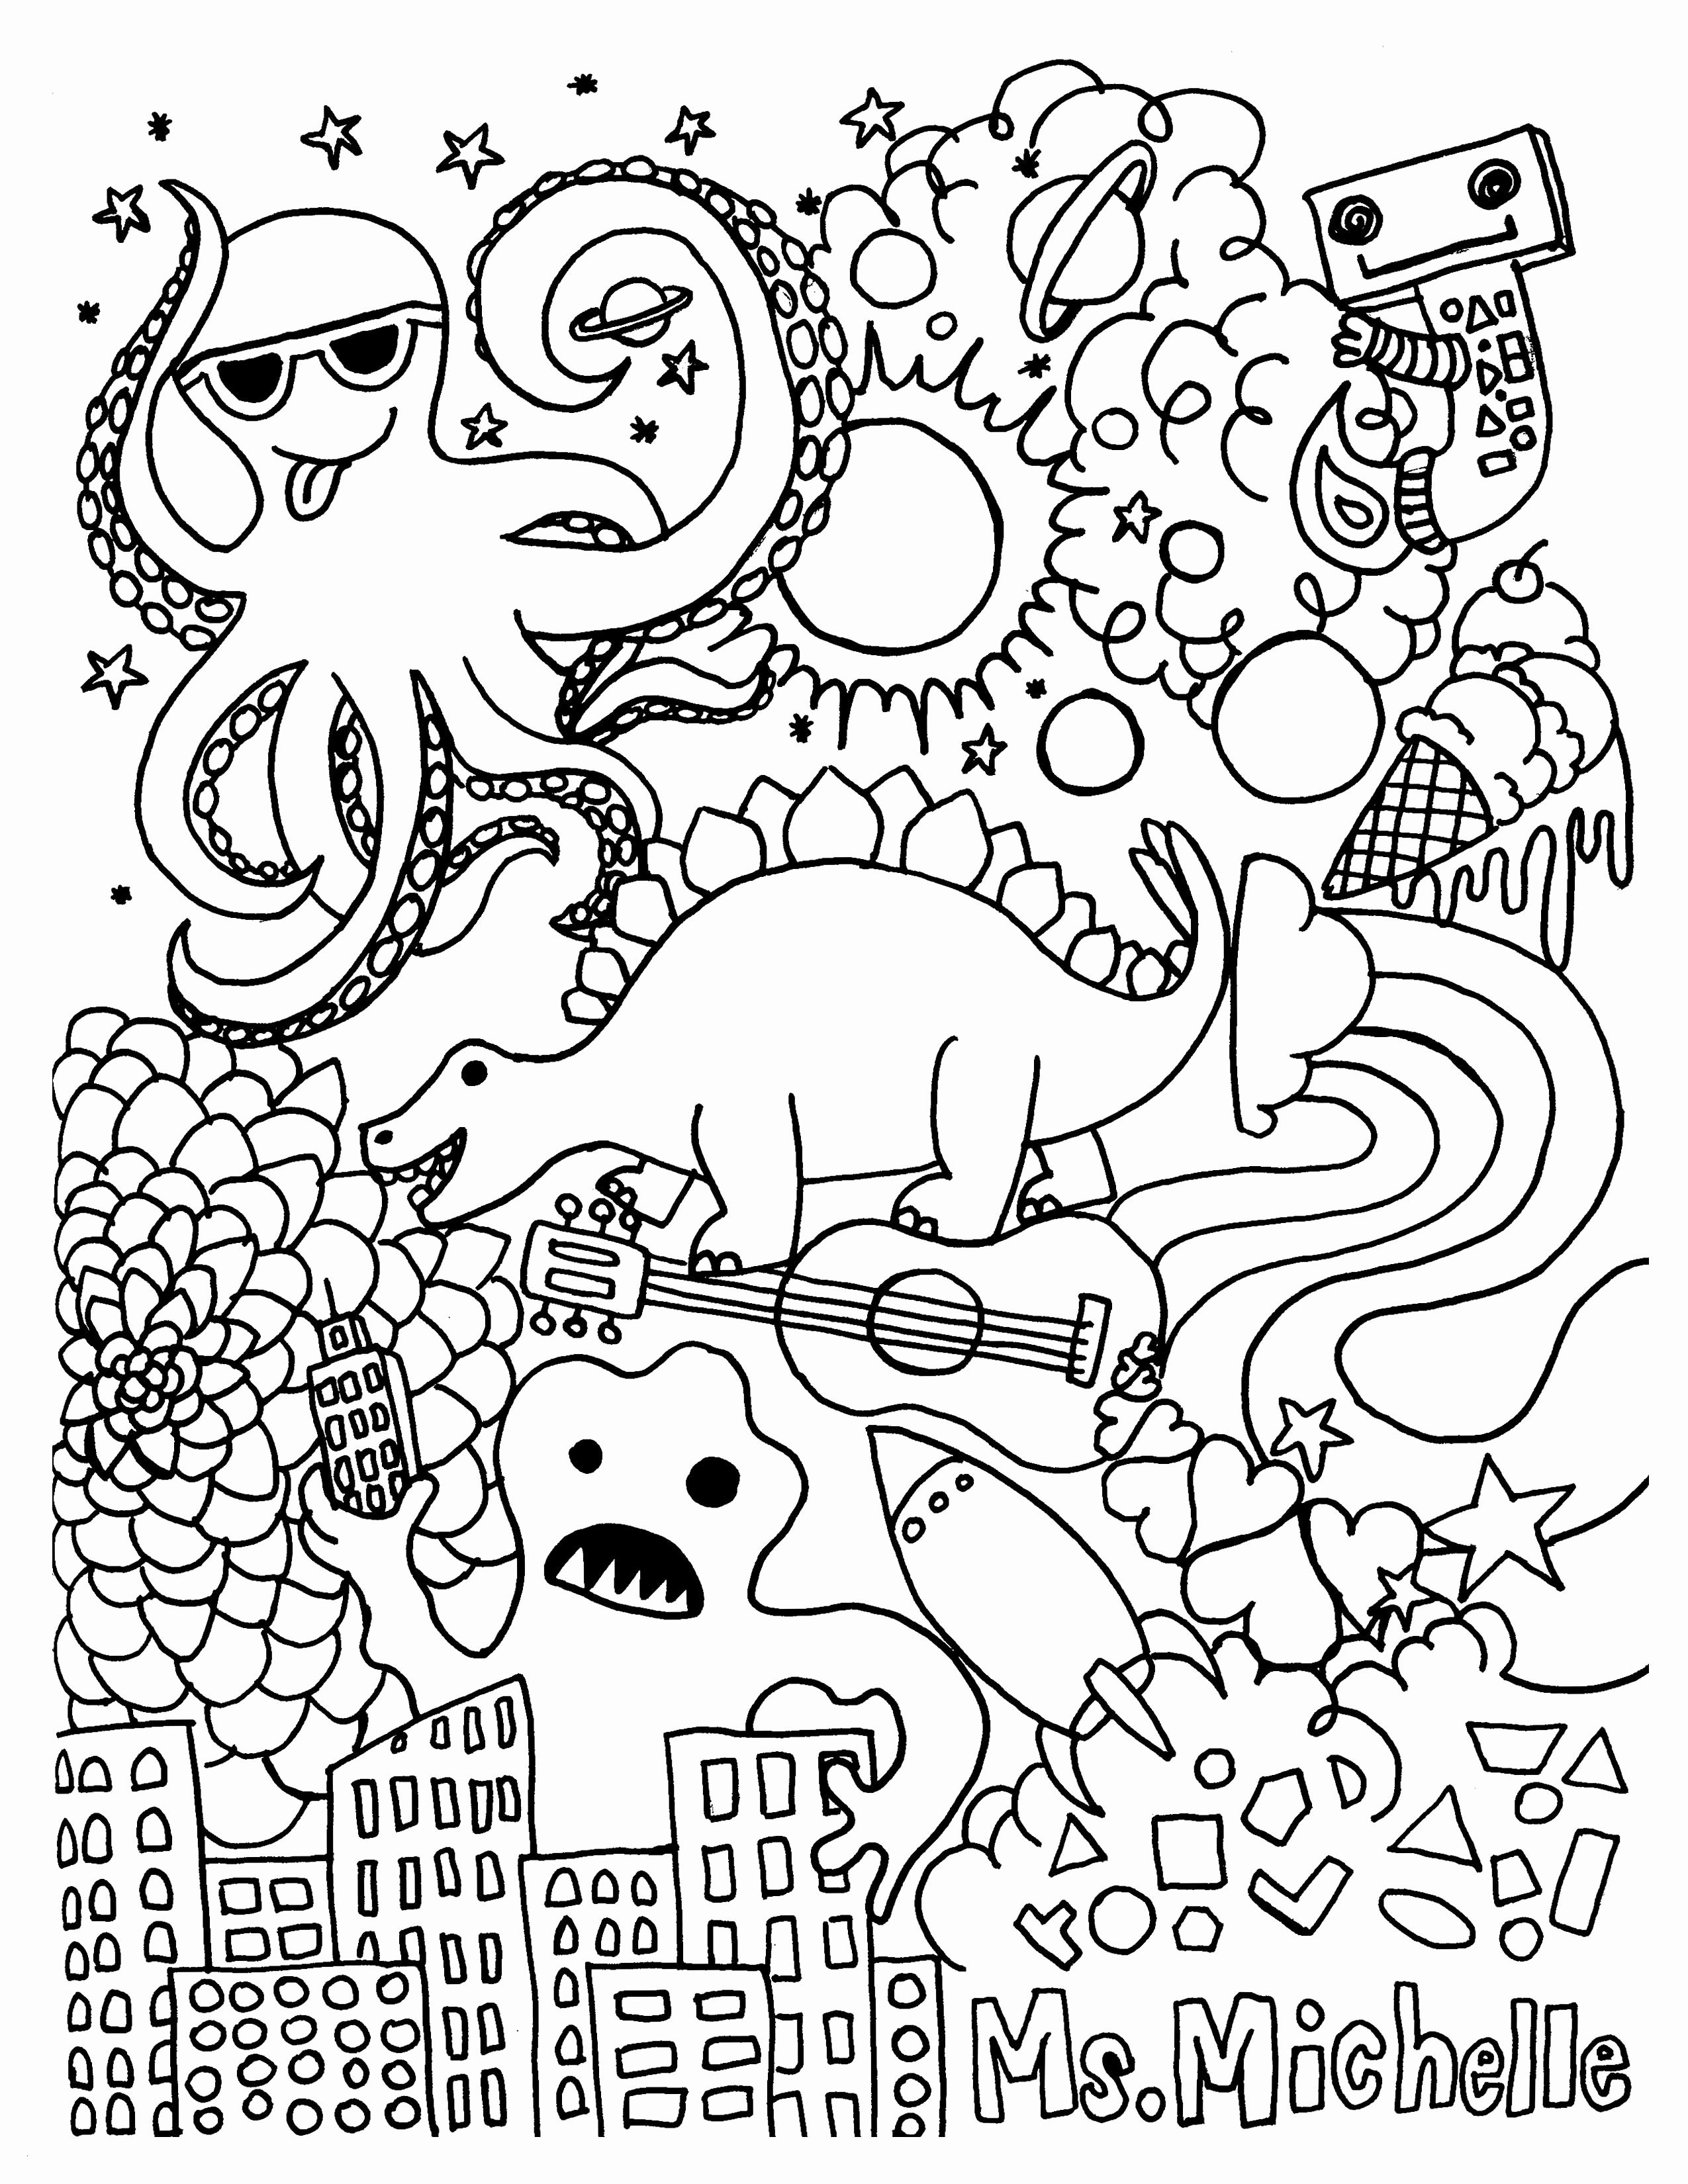 Coloring Page Websites Awesome Halloween Printable Coloring Pages Amazing Halloween Printable